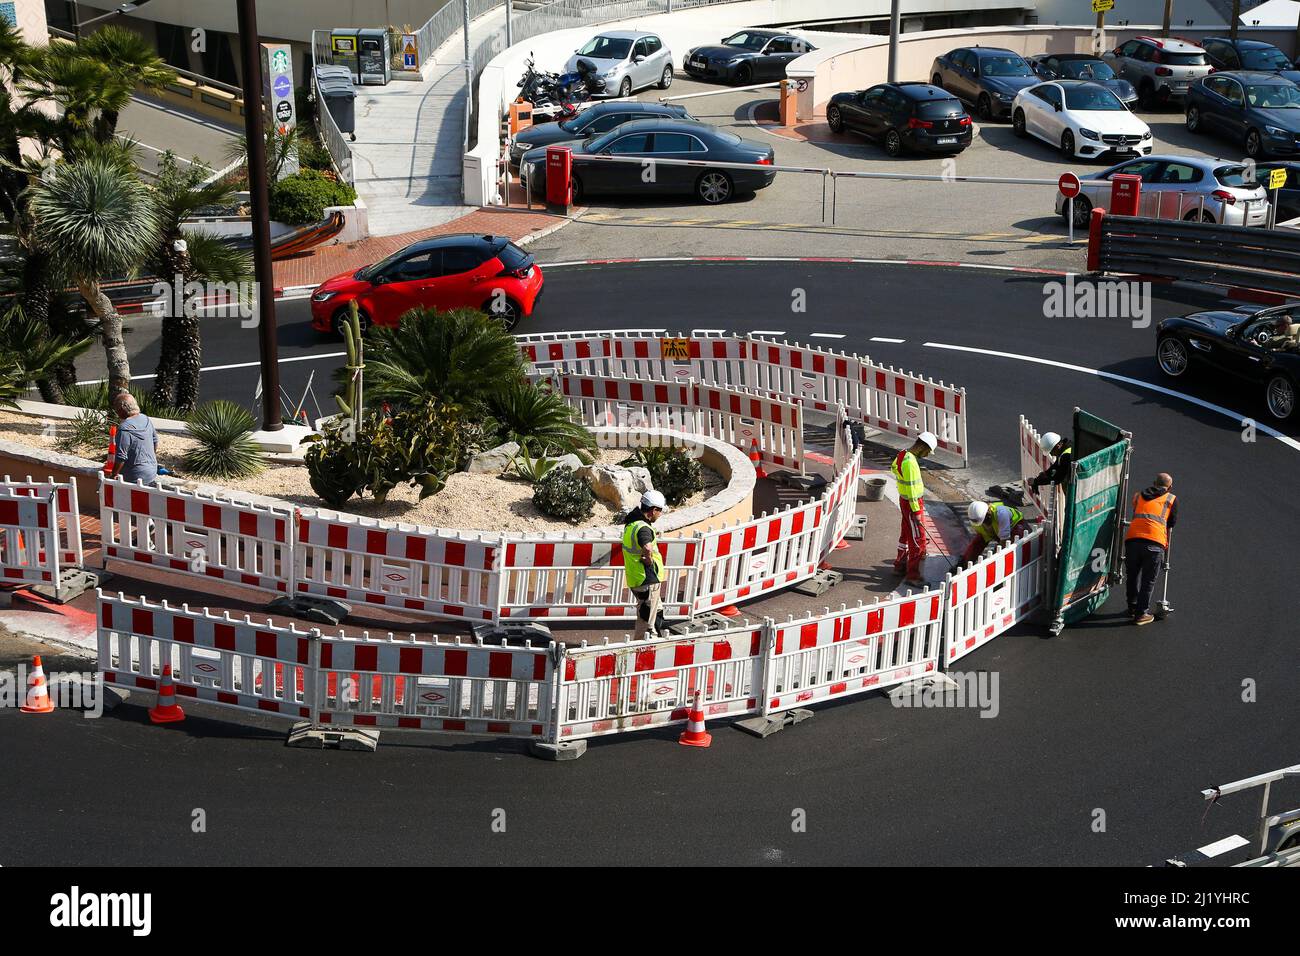 Monte Carlo, Monoco. 28 Mar 2022 - Workmen prepare at Grand Hotel Hairpin for Monte Carlo Grand Prix Formula 1 race. The race takes place on 29 May 2022. Credit Dinendra Haria /Alamy Live News Stock Photo